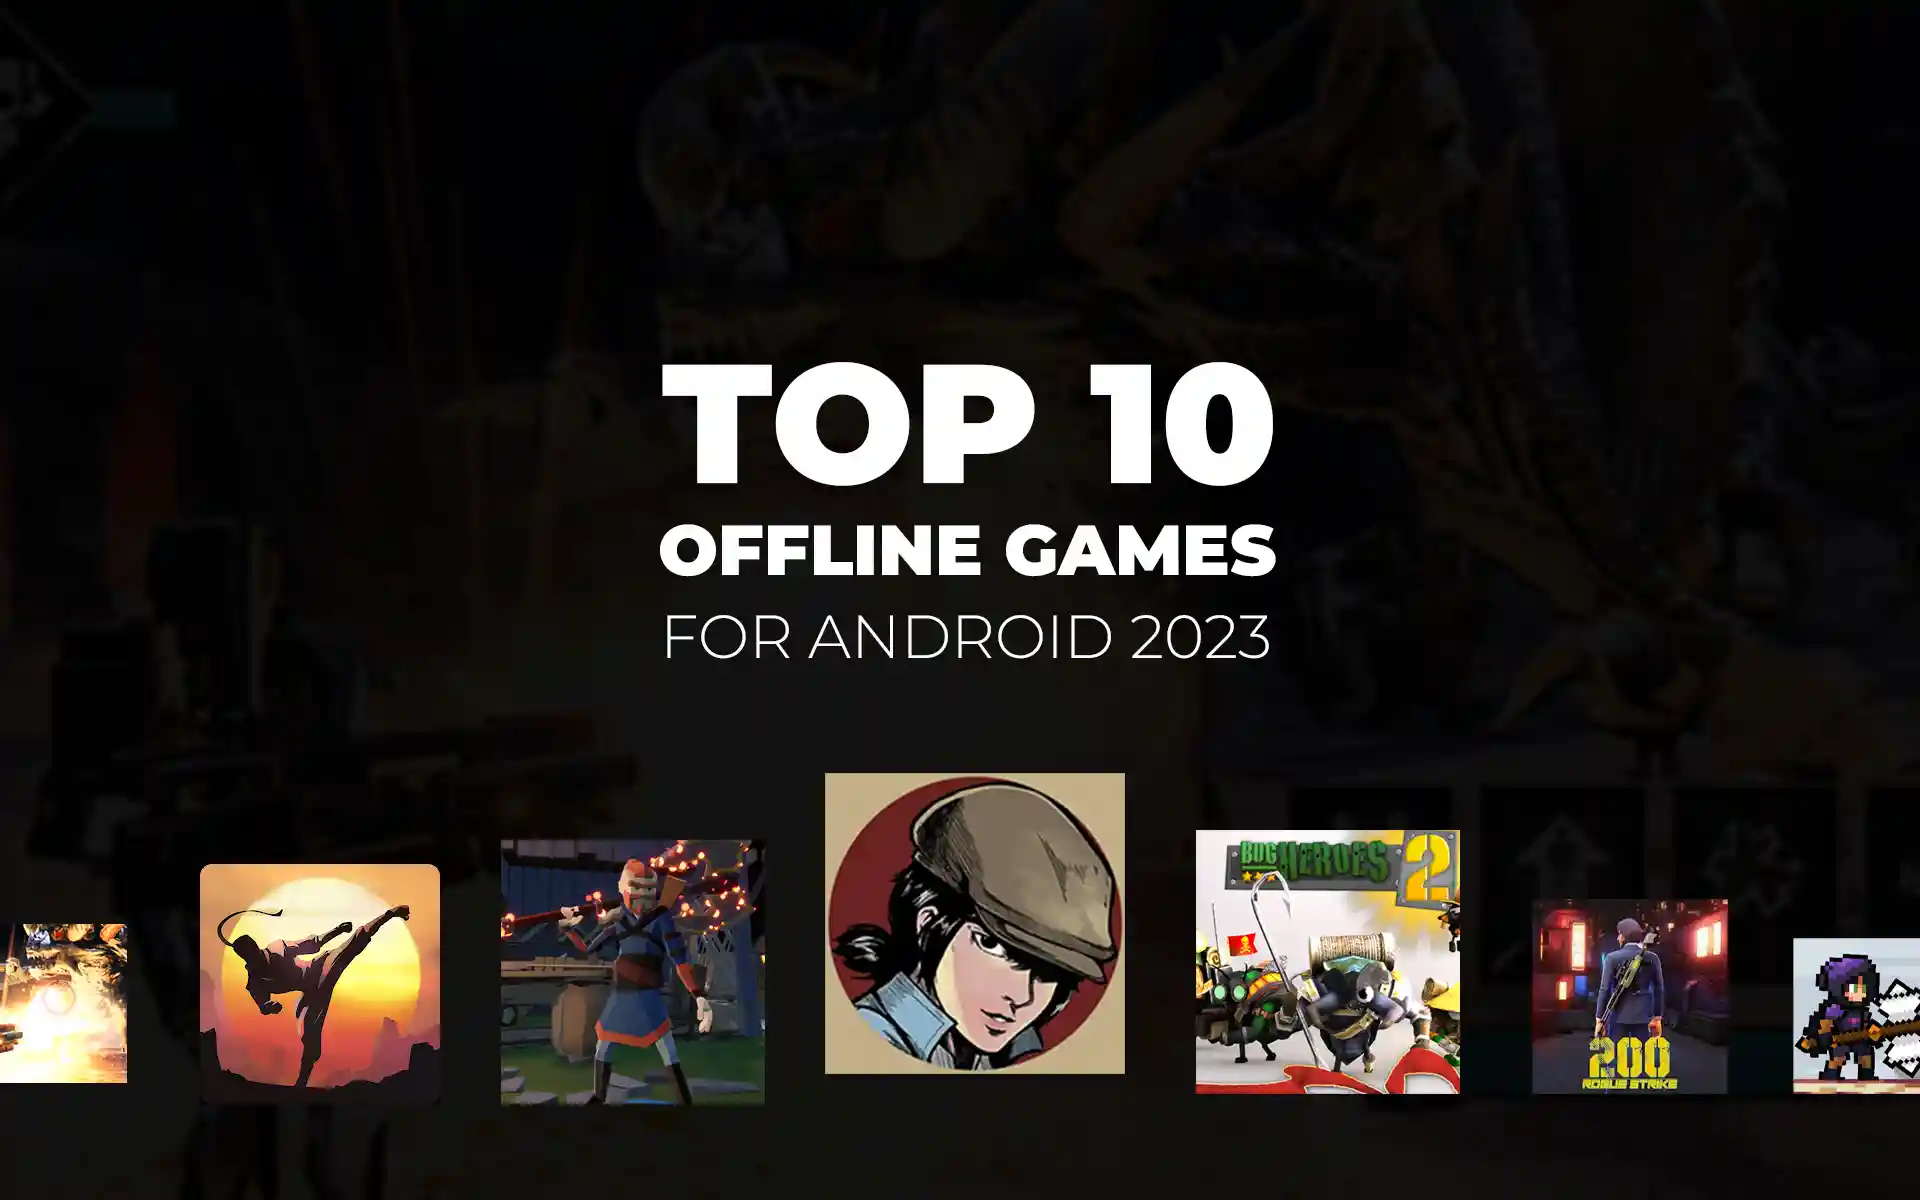 Top 10 offline games for android 2023